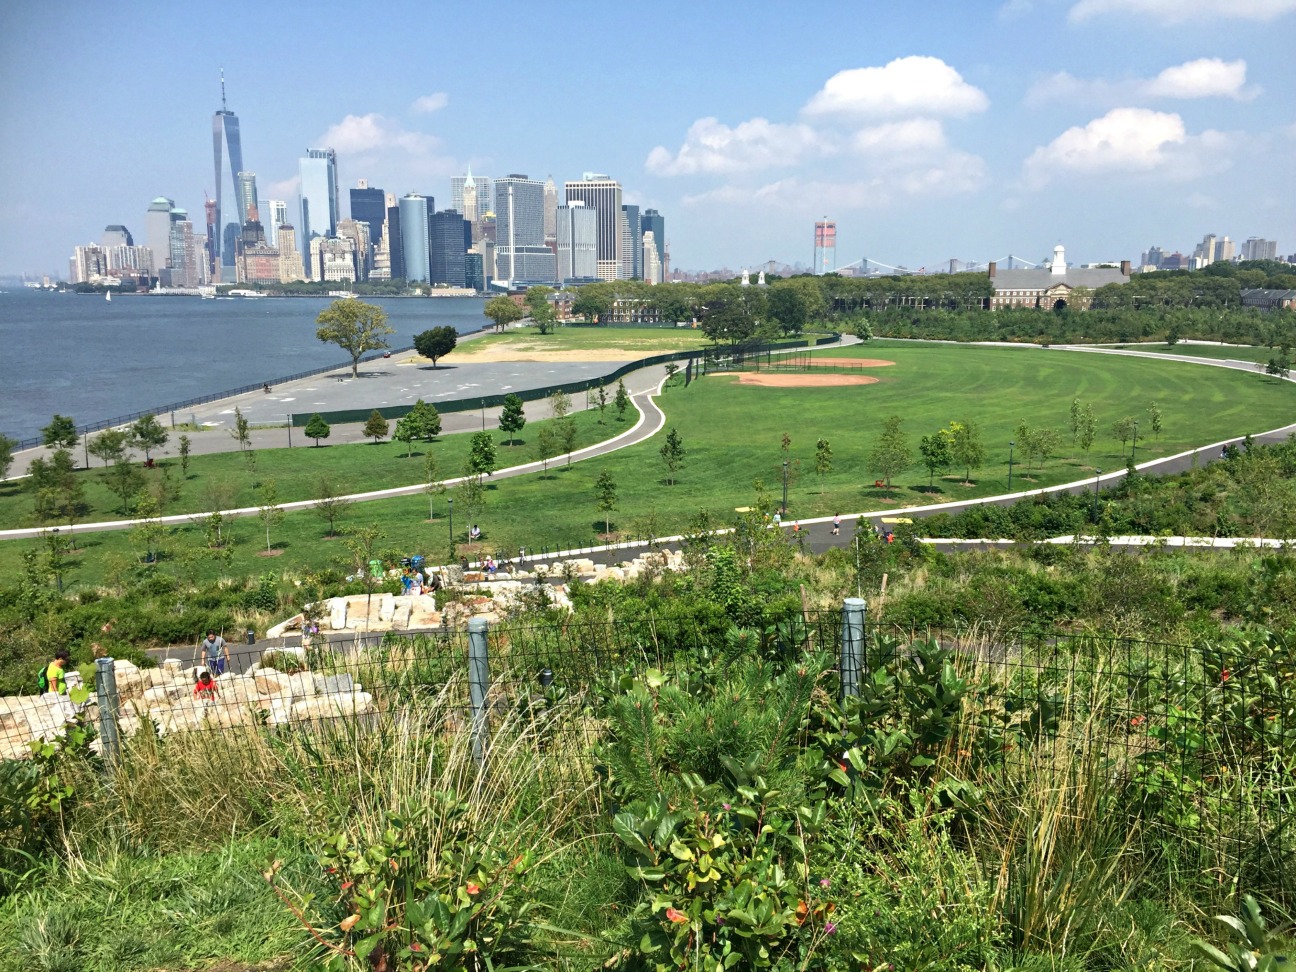 New York Skyline from Outlook Hill on Governors Island